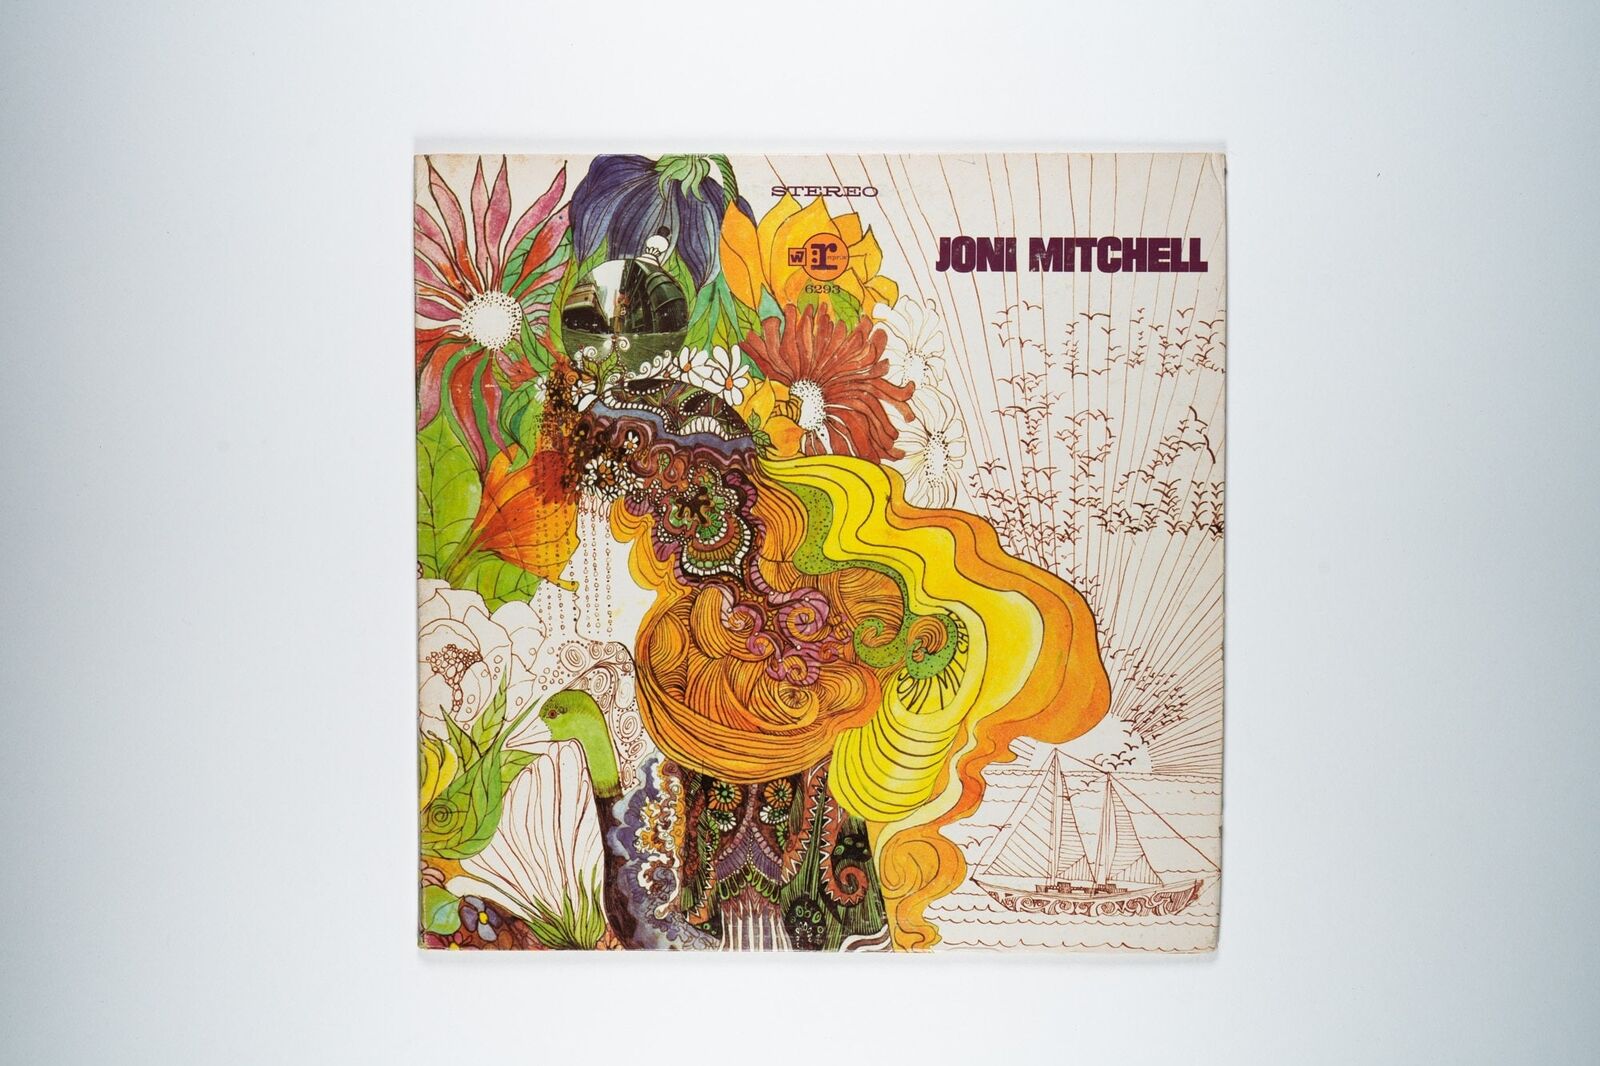 Joni Mitchell - Song To A Seagull - Vinyl LP Record - 1968